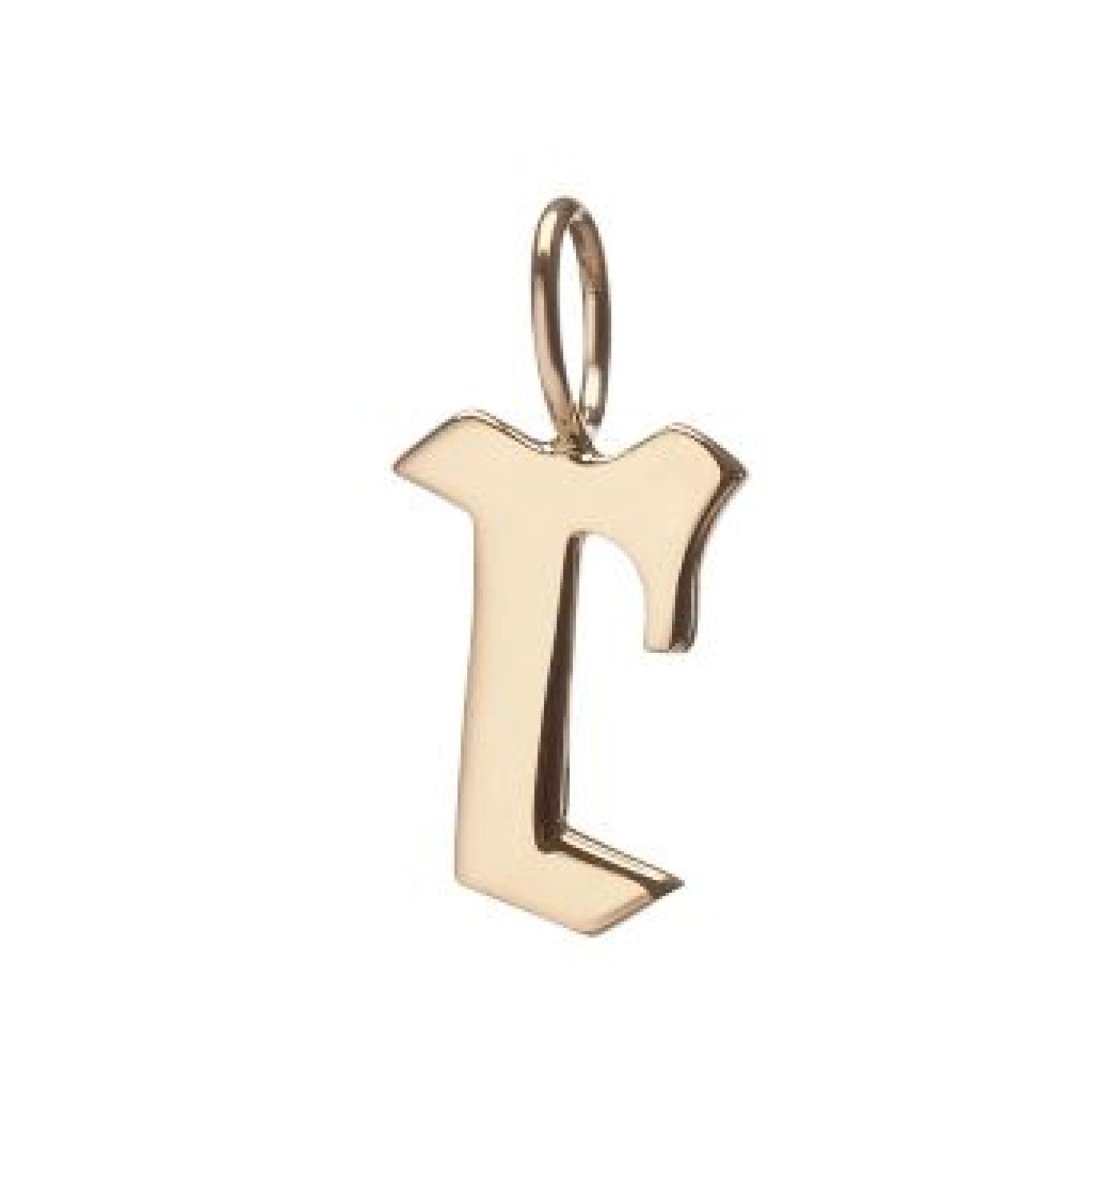 Gold Filled Charm Personalized Gotic Initial Letter Charm Necklace, Custom Old English Font Style, Delicate Initial Necklace For Women Men (Small) | A-213 to A238, A-240 to A-265 - DLUXCA